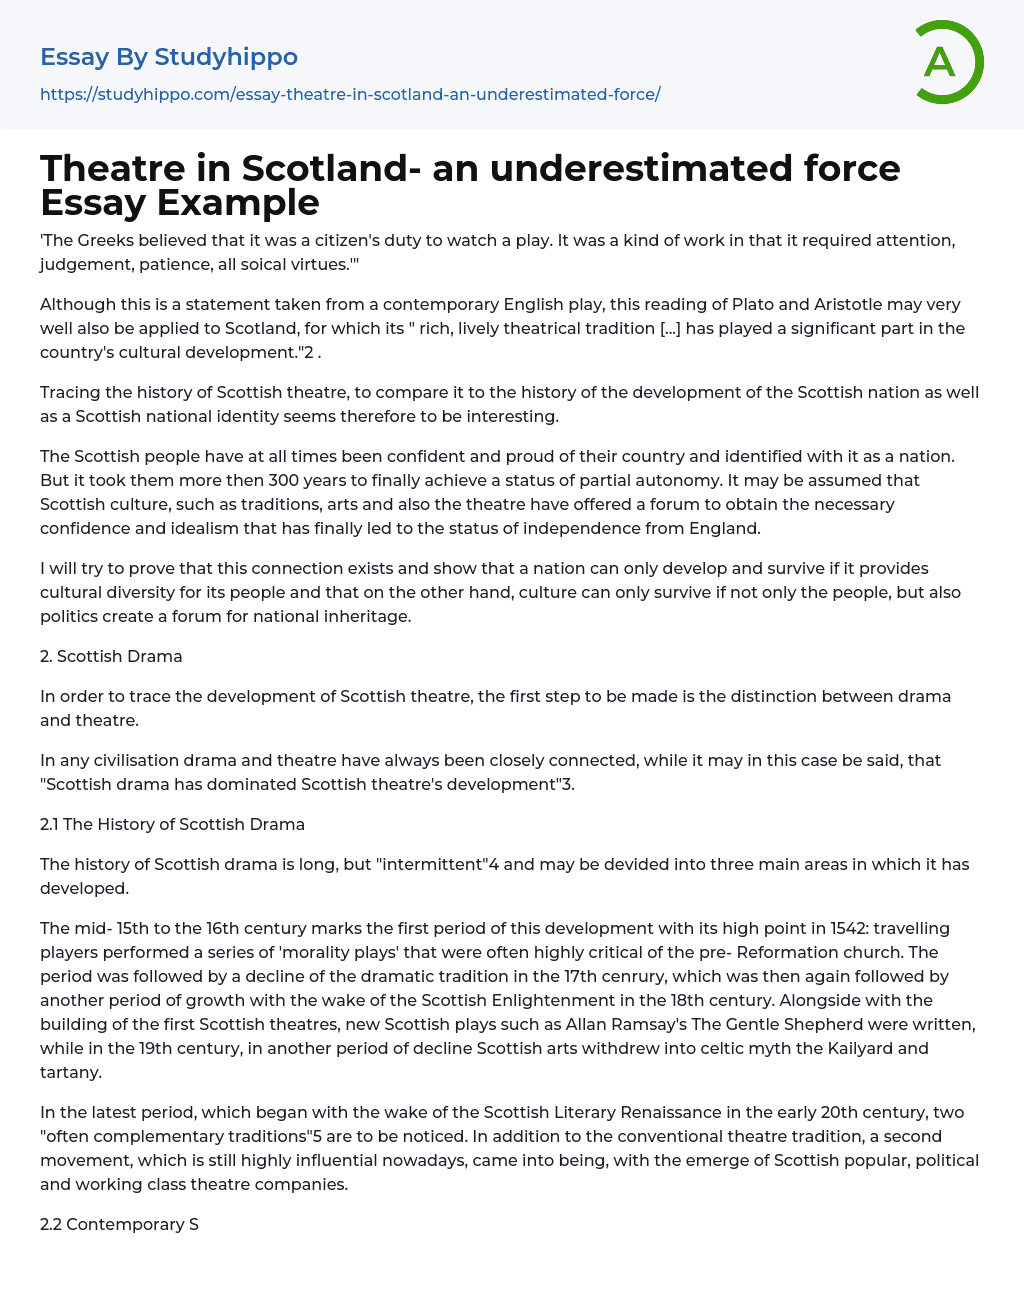 Theatre in Scotland- an underestimated force Essay Example